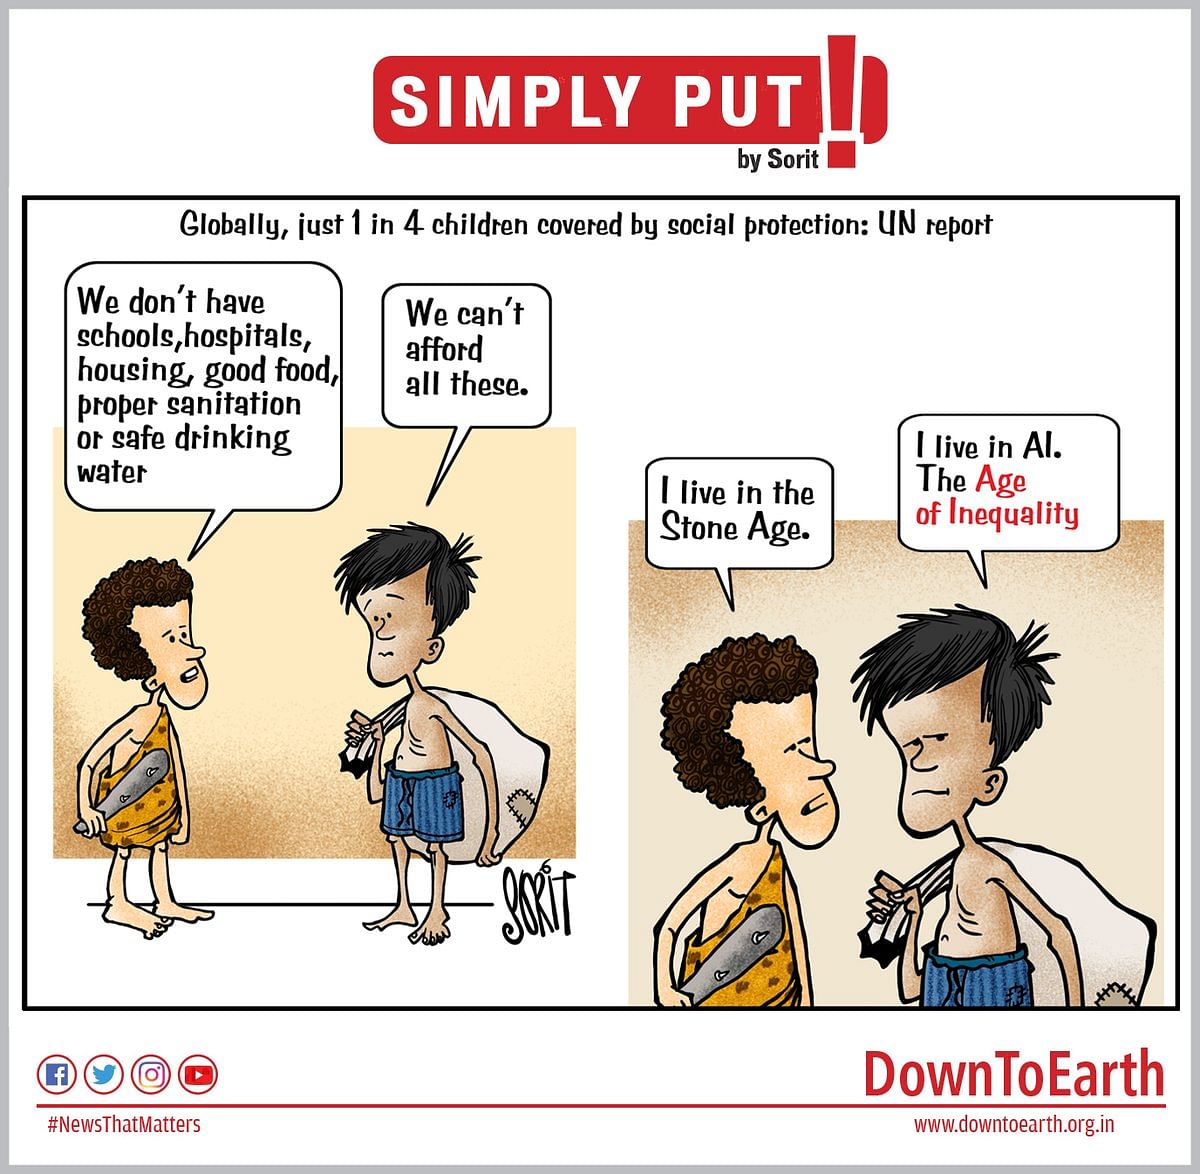 Down To Earth | Twitter @down2earthindia